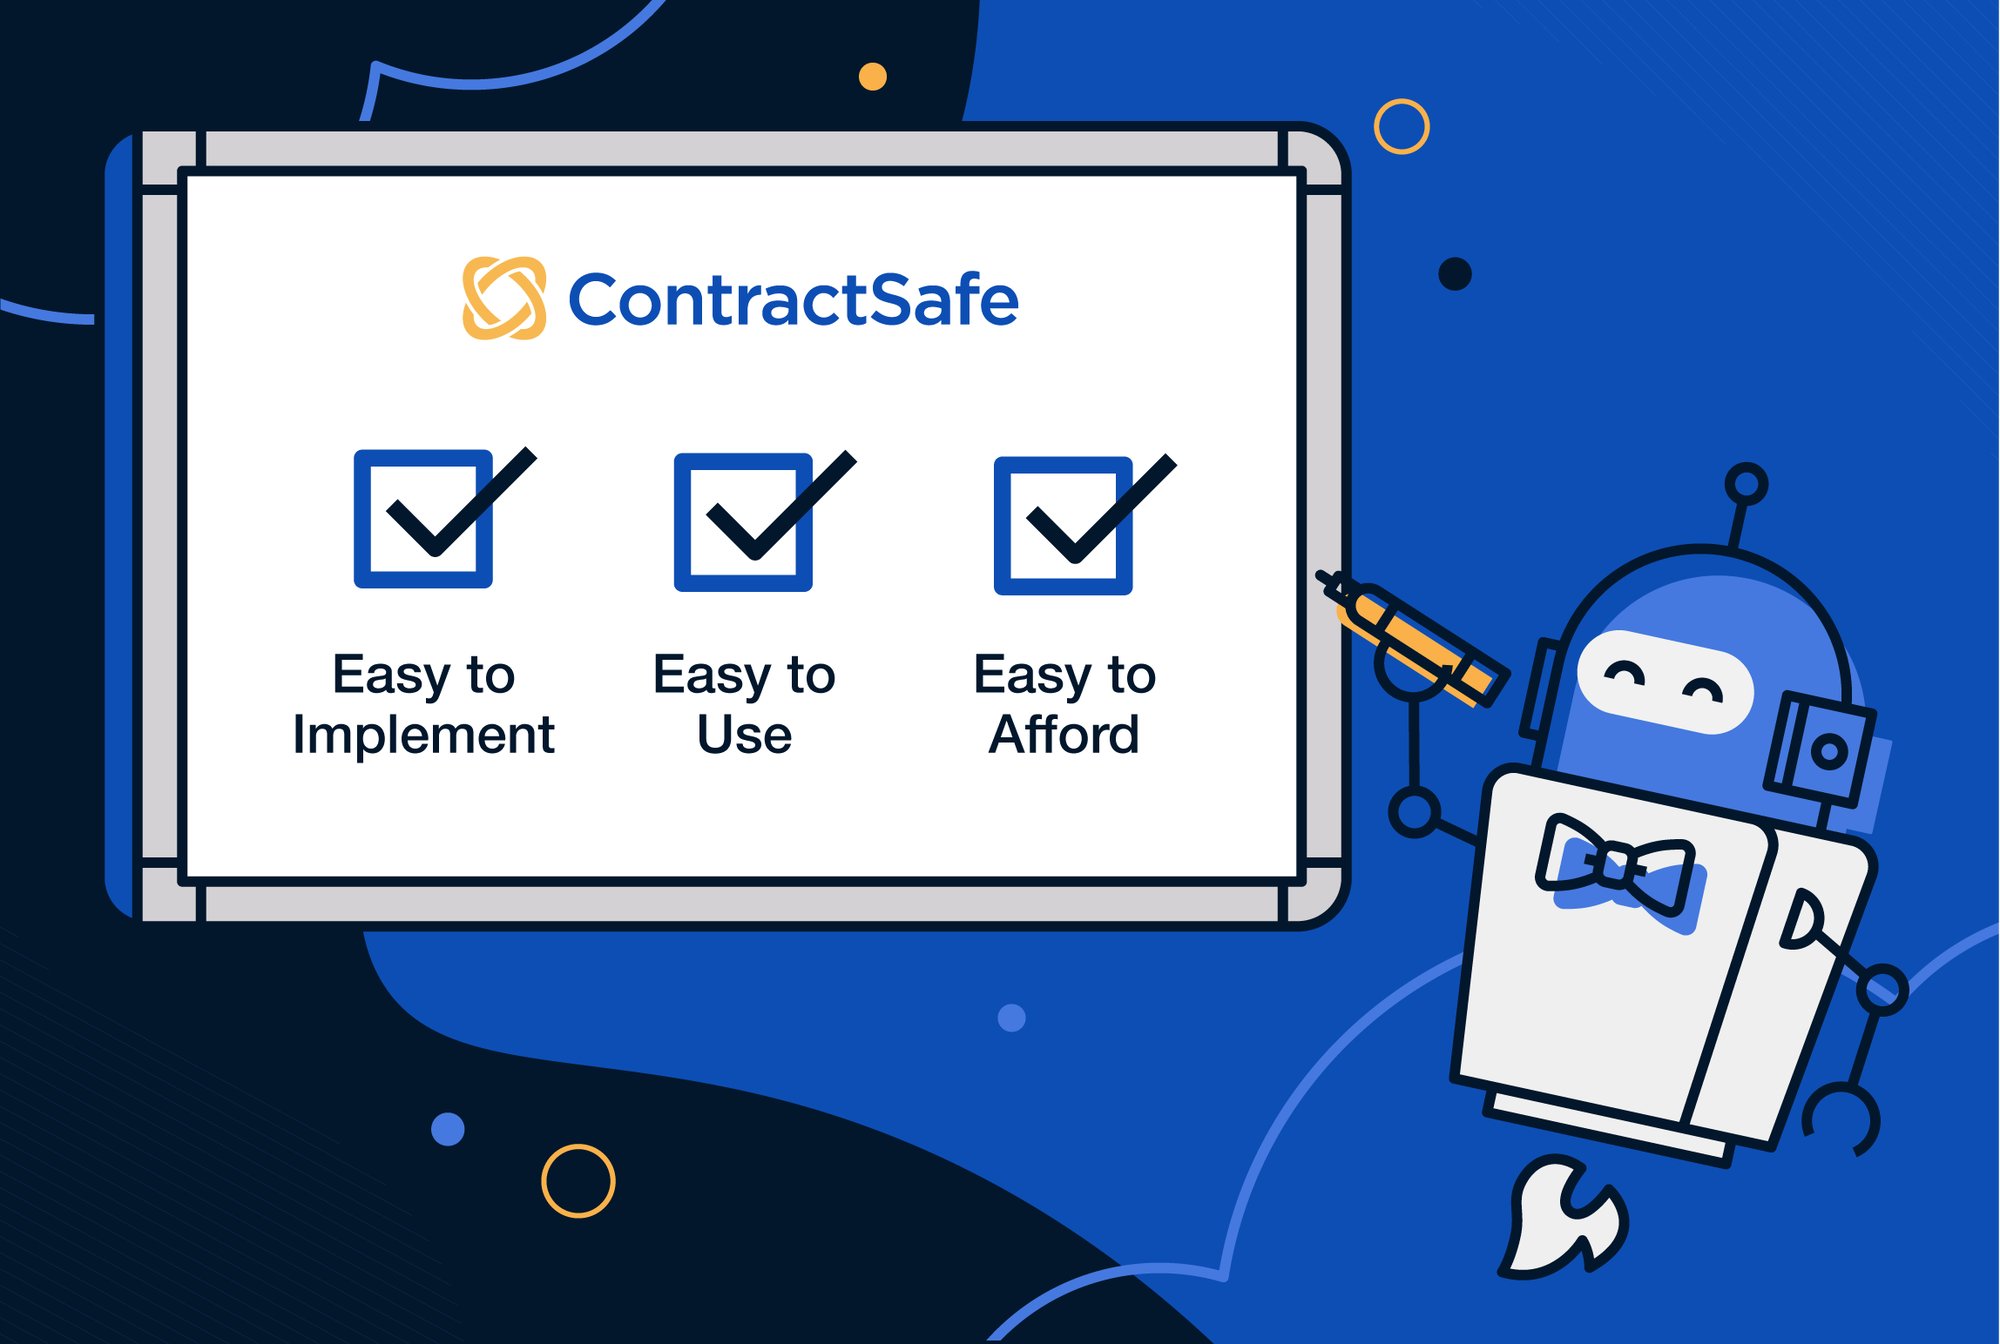 contract-safe-is-easy-to-implement-use-and-afford